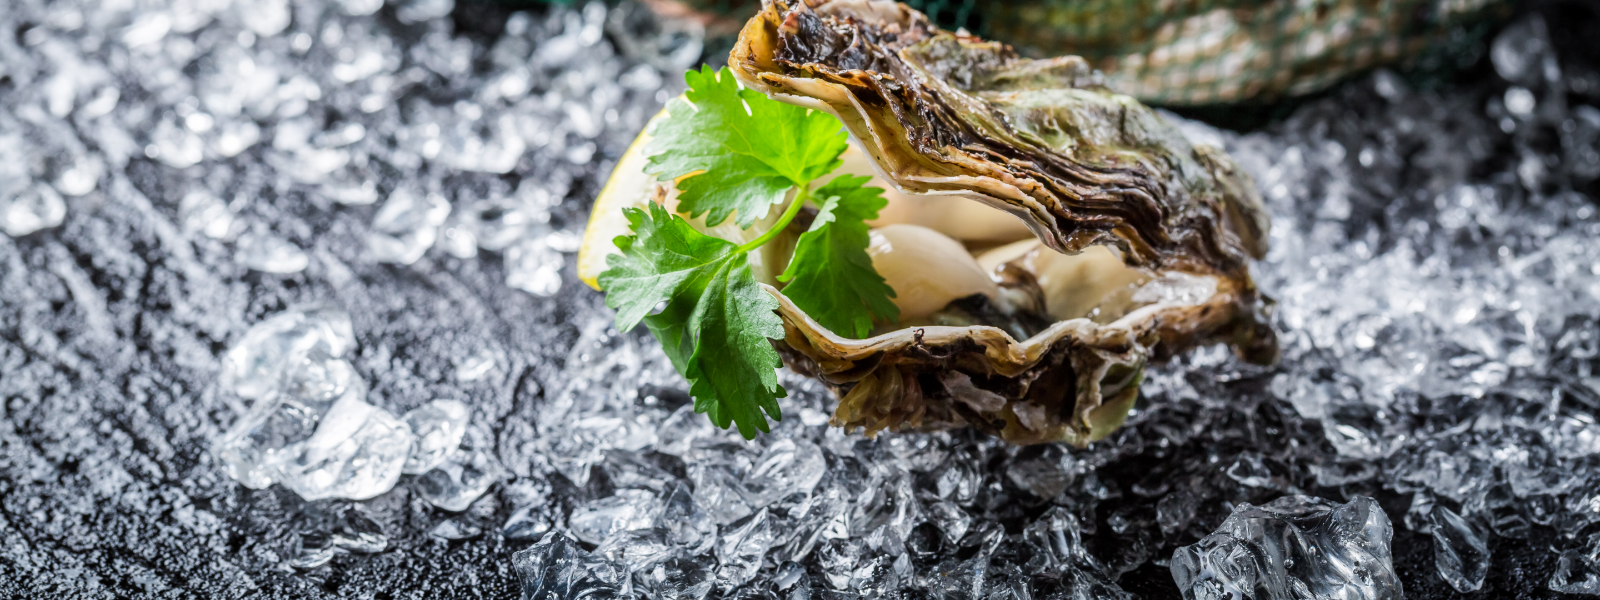 AUSTERIUM OÜ - We provide an exceptional oyster bar catering service, bringing a taste of the ocean to your events.